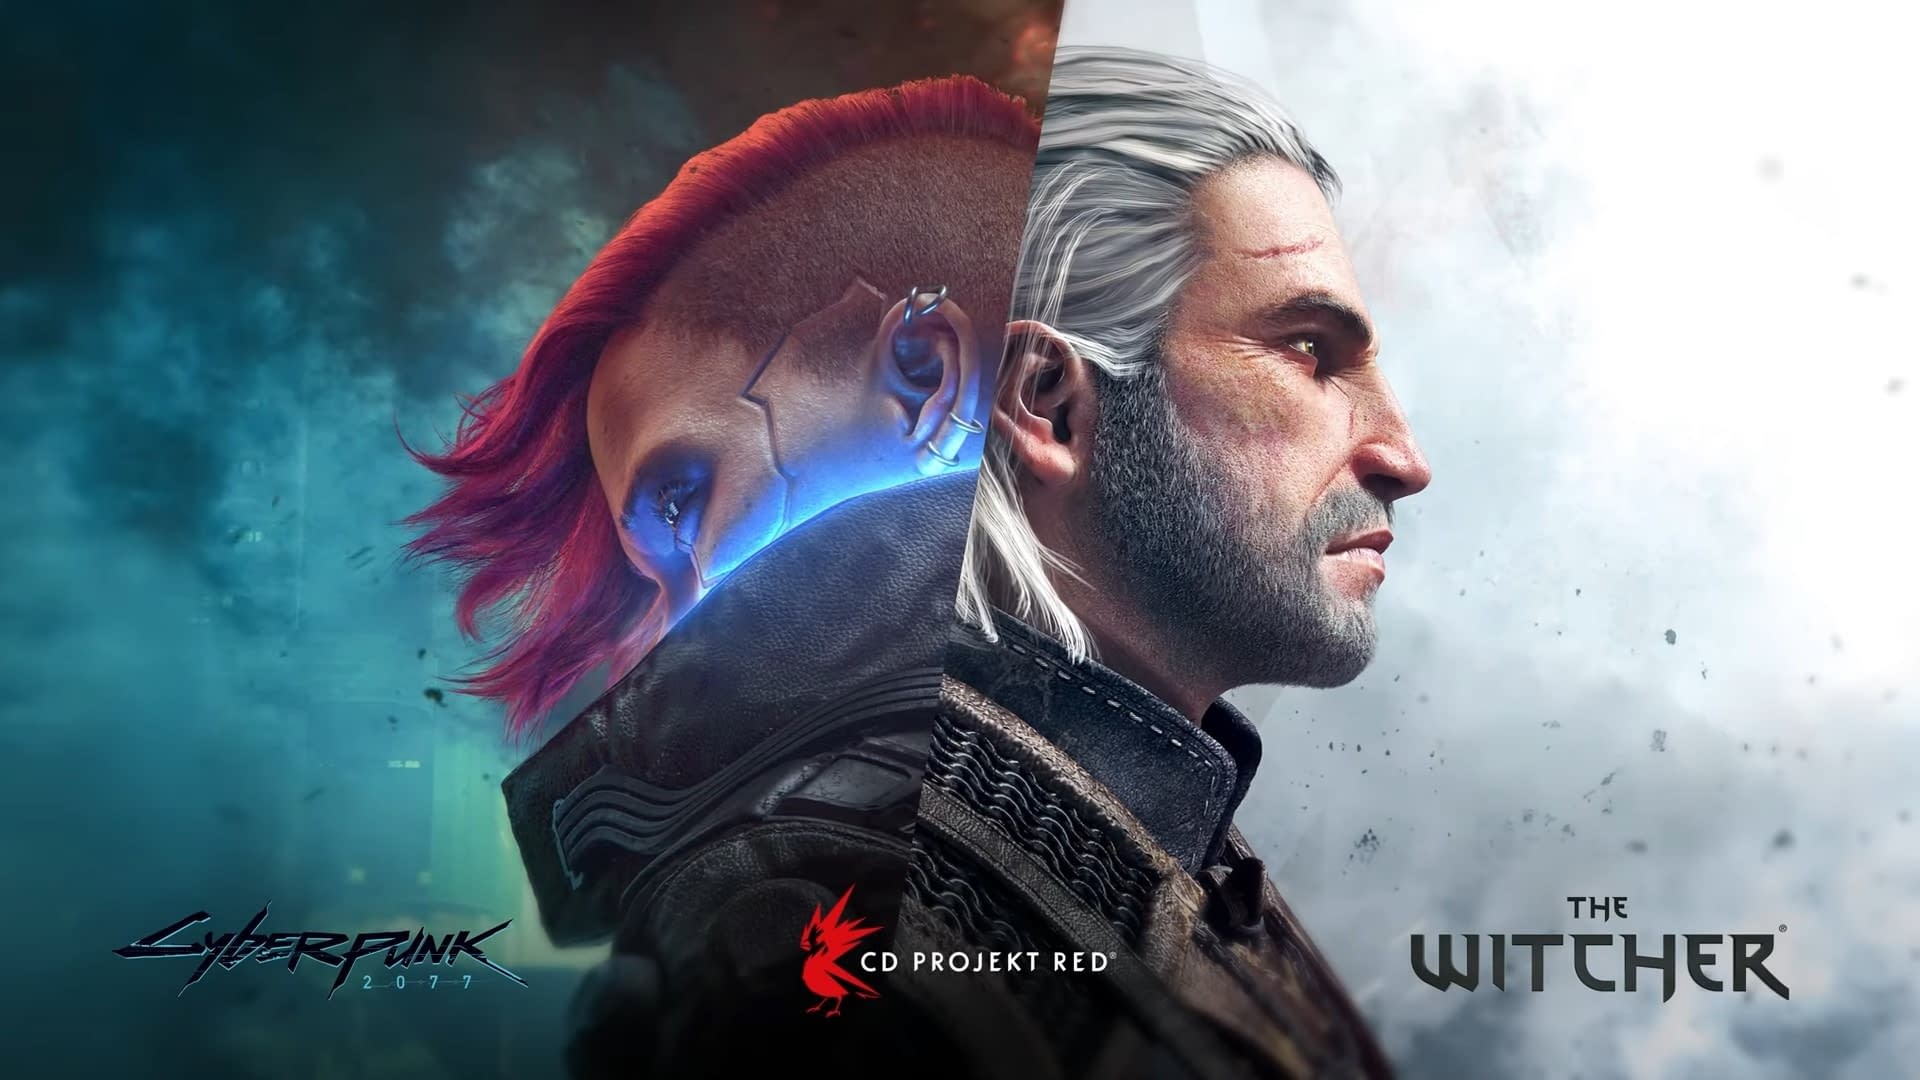 CD Projekt RED Announces Development of Three New Witcher Games